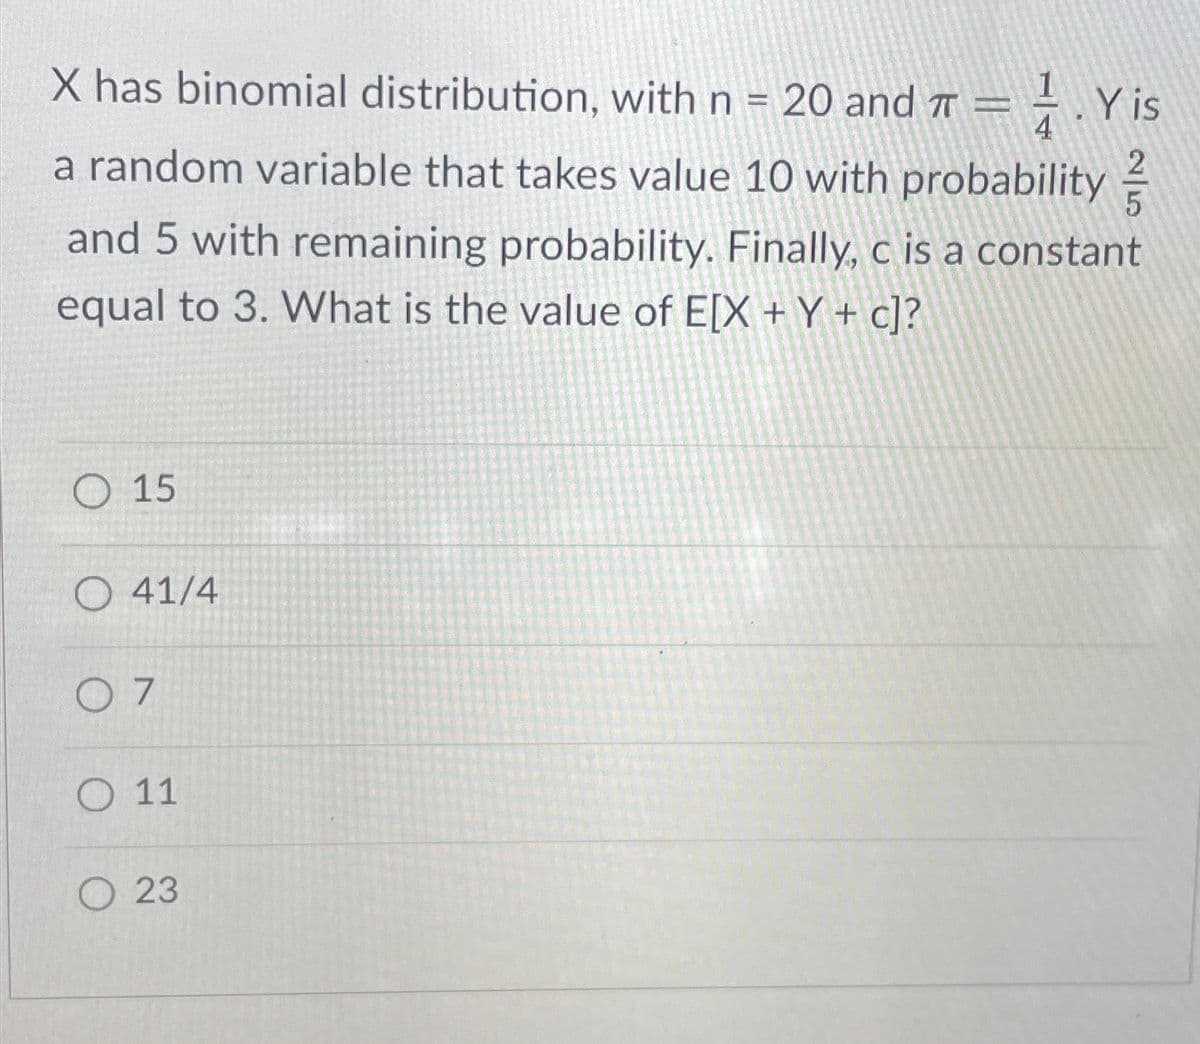 X has binomial distribution, with n = 20 and π = . Y is
4
a random variable that takes value 10 with probability
and 5 with remaining probability. Finally, c is a constant
equal to 3. What is the value of E[X + Y + c]?
O15
O 41/4
07
O 11
23
|N
2
5